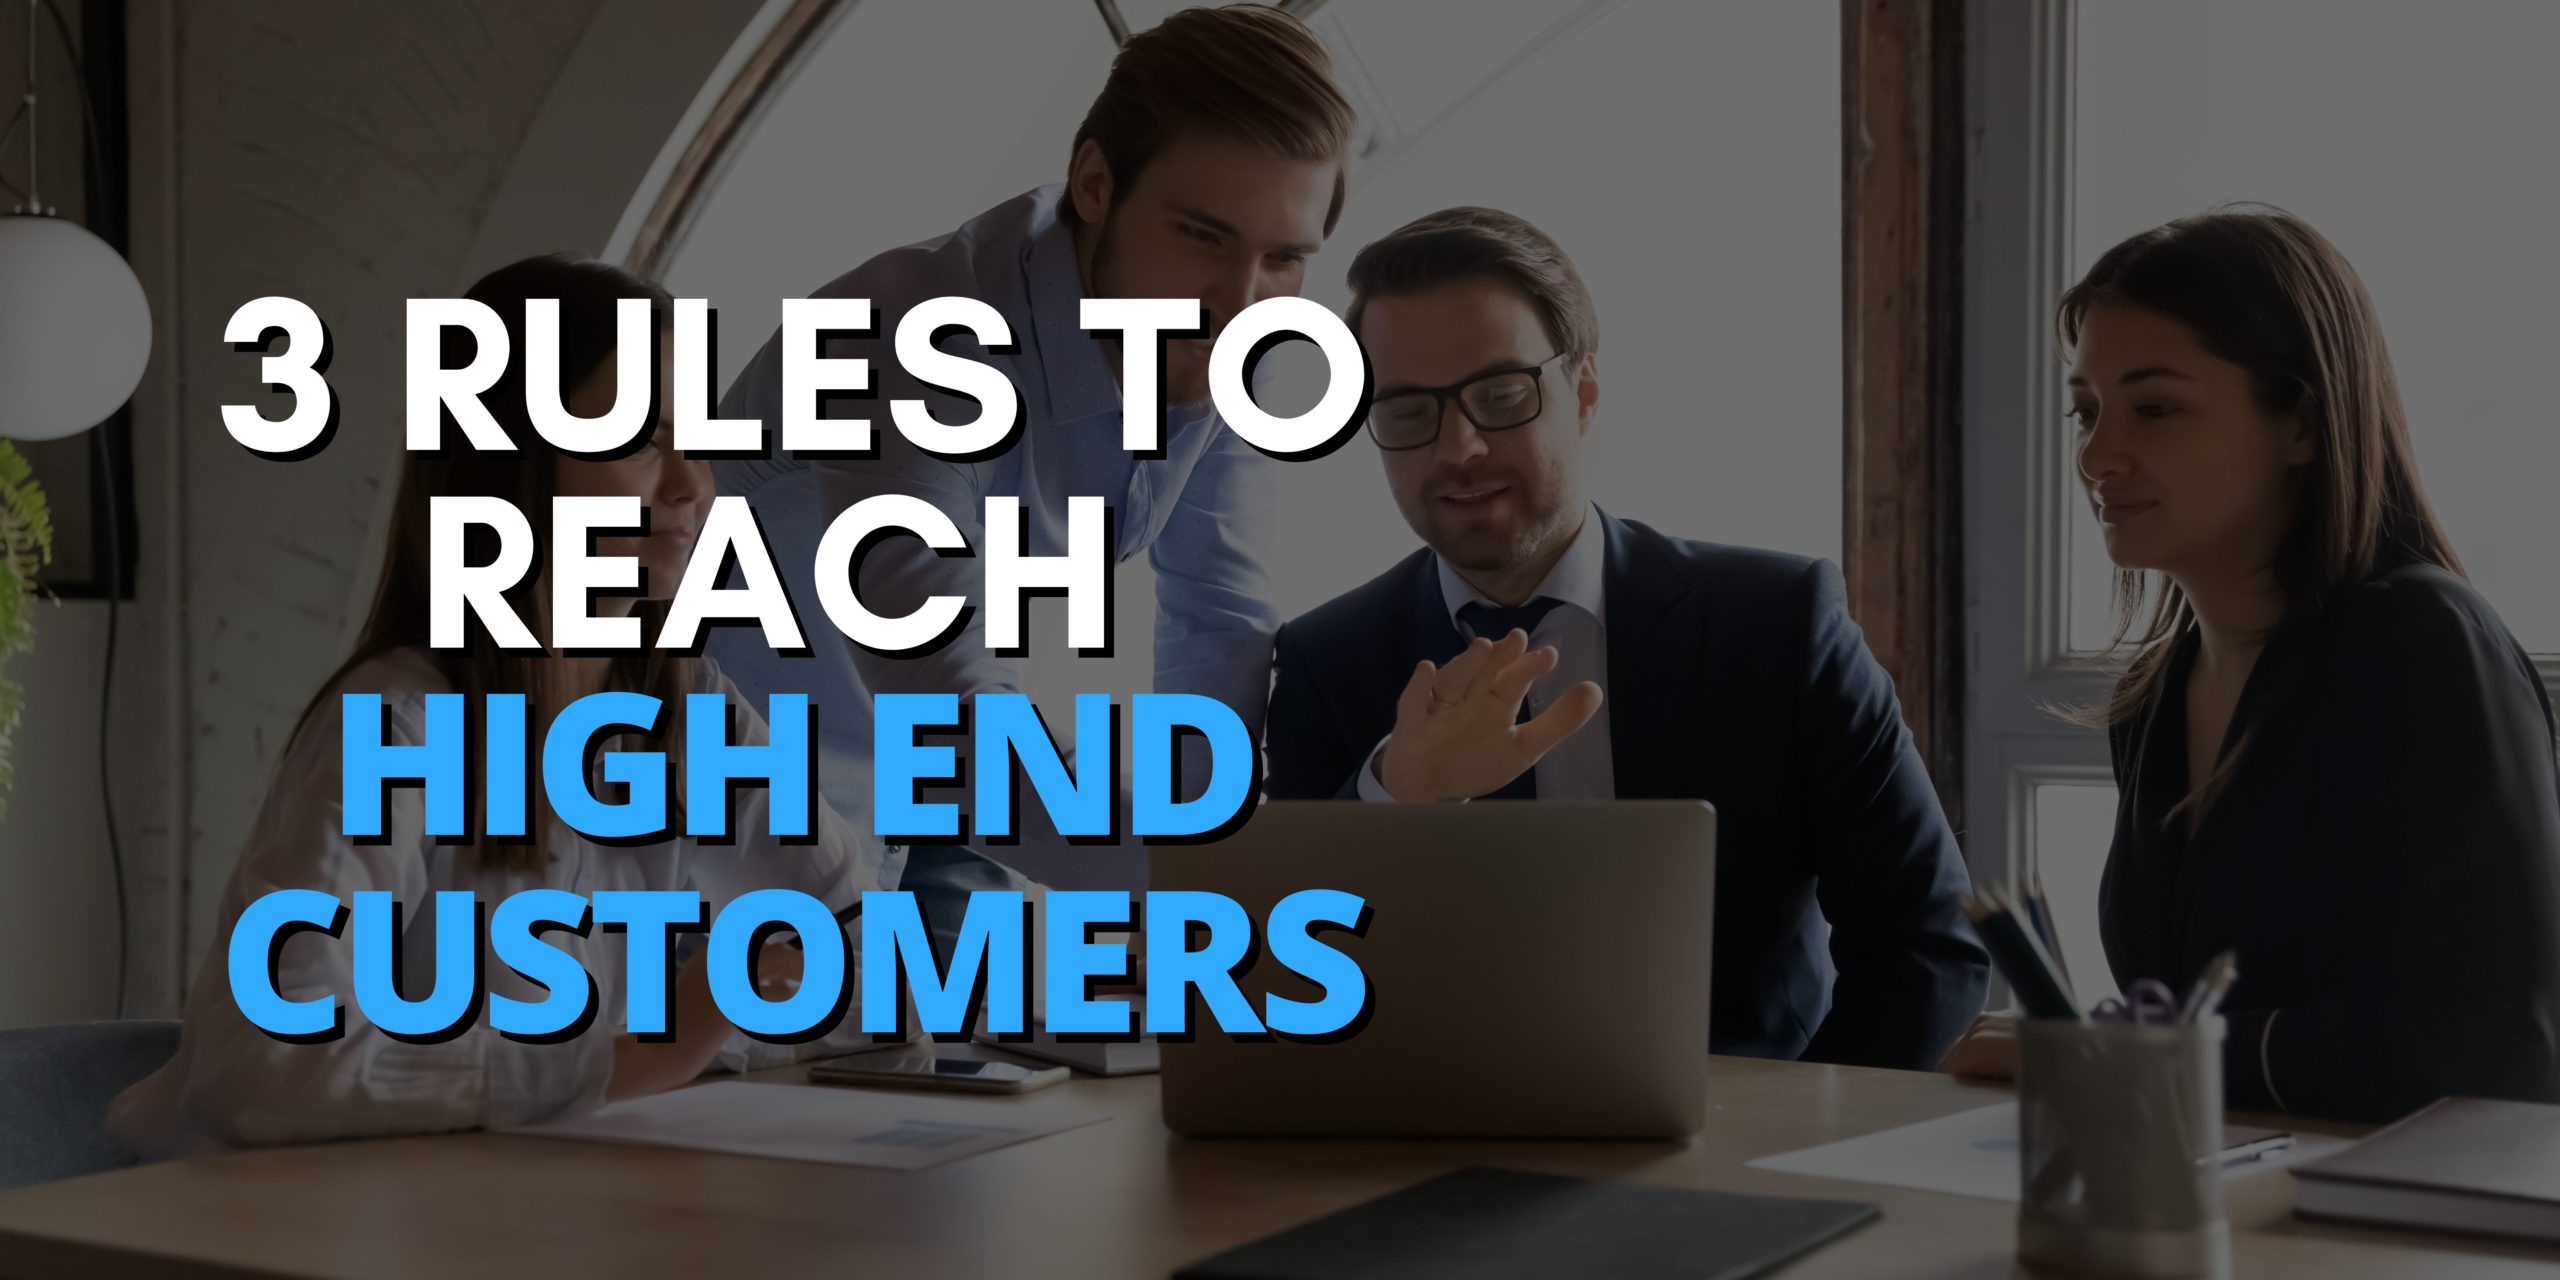 3 Rules To Reach High End Customers